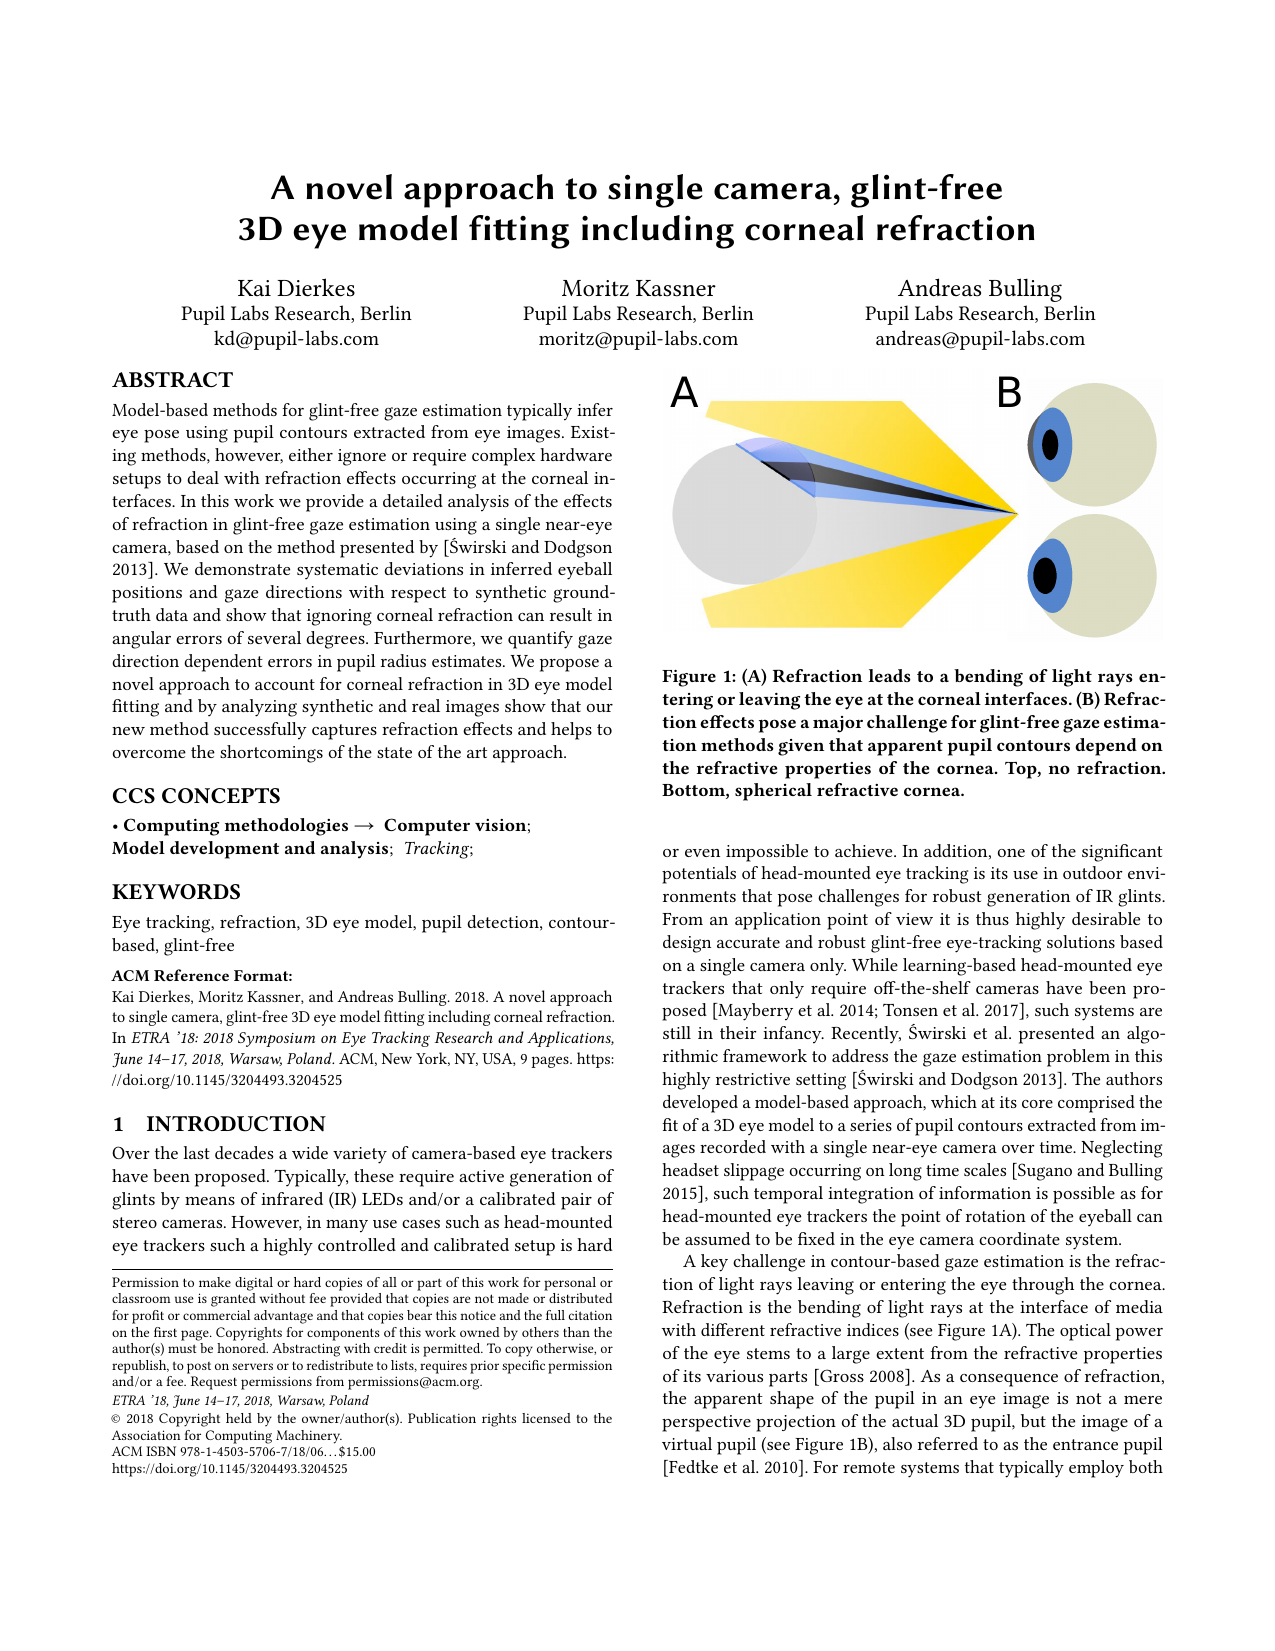 A novel approach to single camera, glint-free 3D eye model fitting including corneal refraction